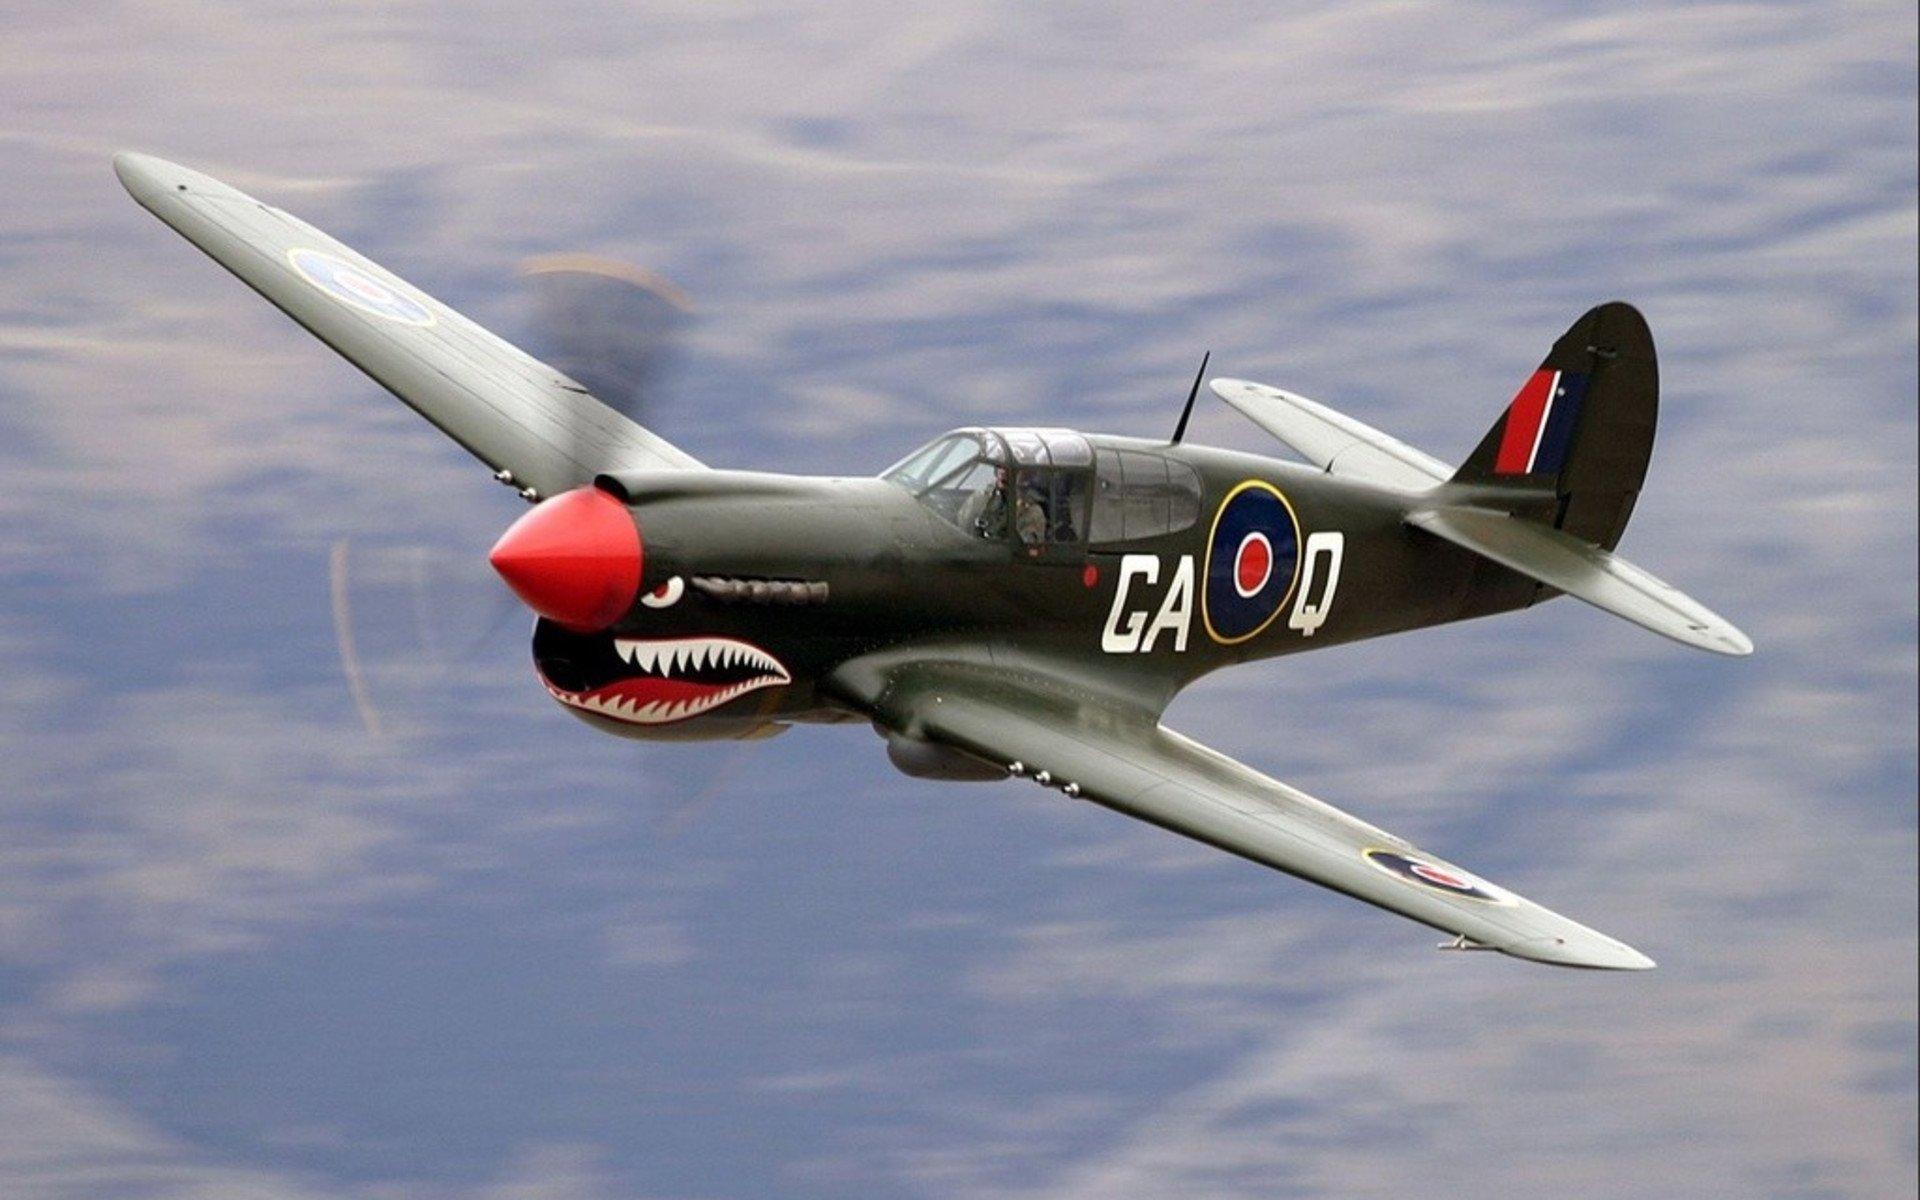 20 Curtiss P 40 Warhawk Hd Wallpapers And Backgrounds | Images and ...